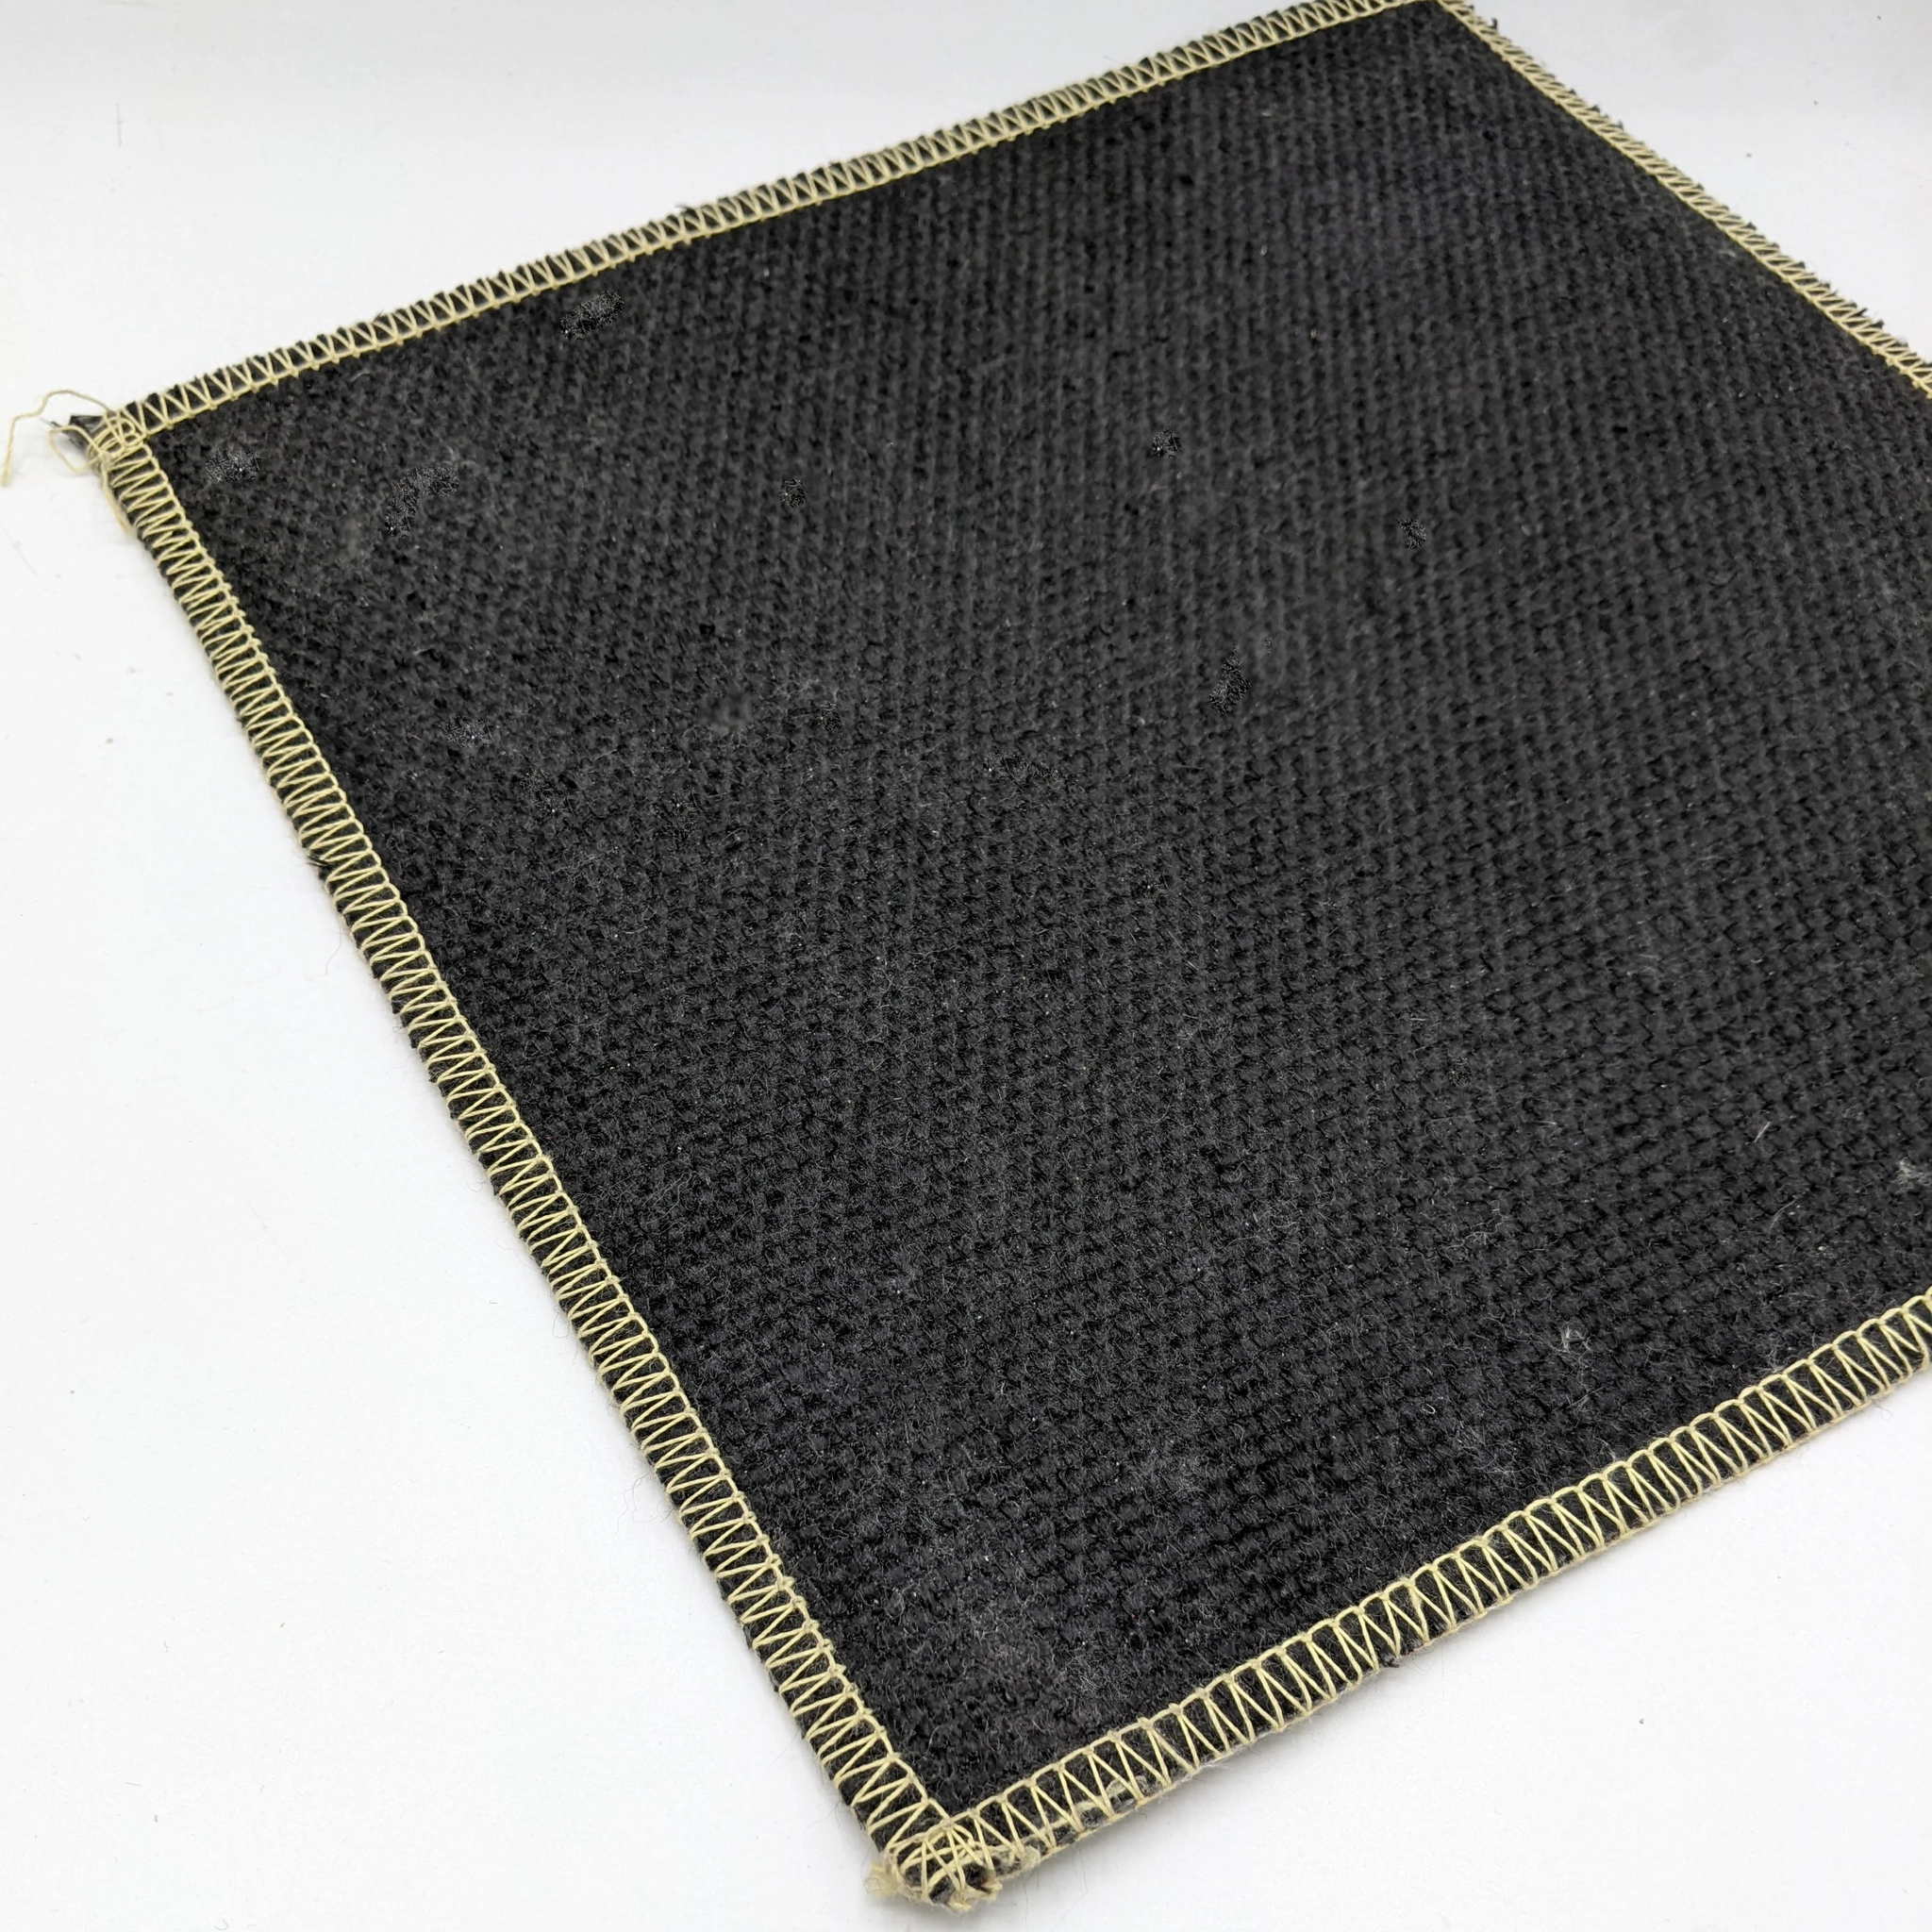 600ºC Gamasco 2 Layer Heat Resistant Plumbers Mat Silica/Graphited Cloth 250mm x 250mm